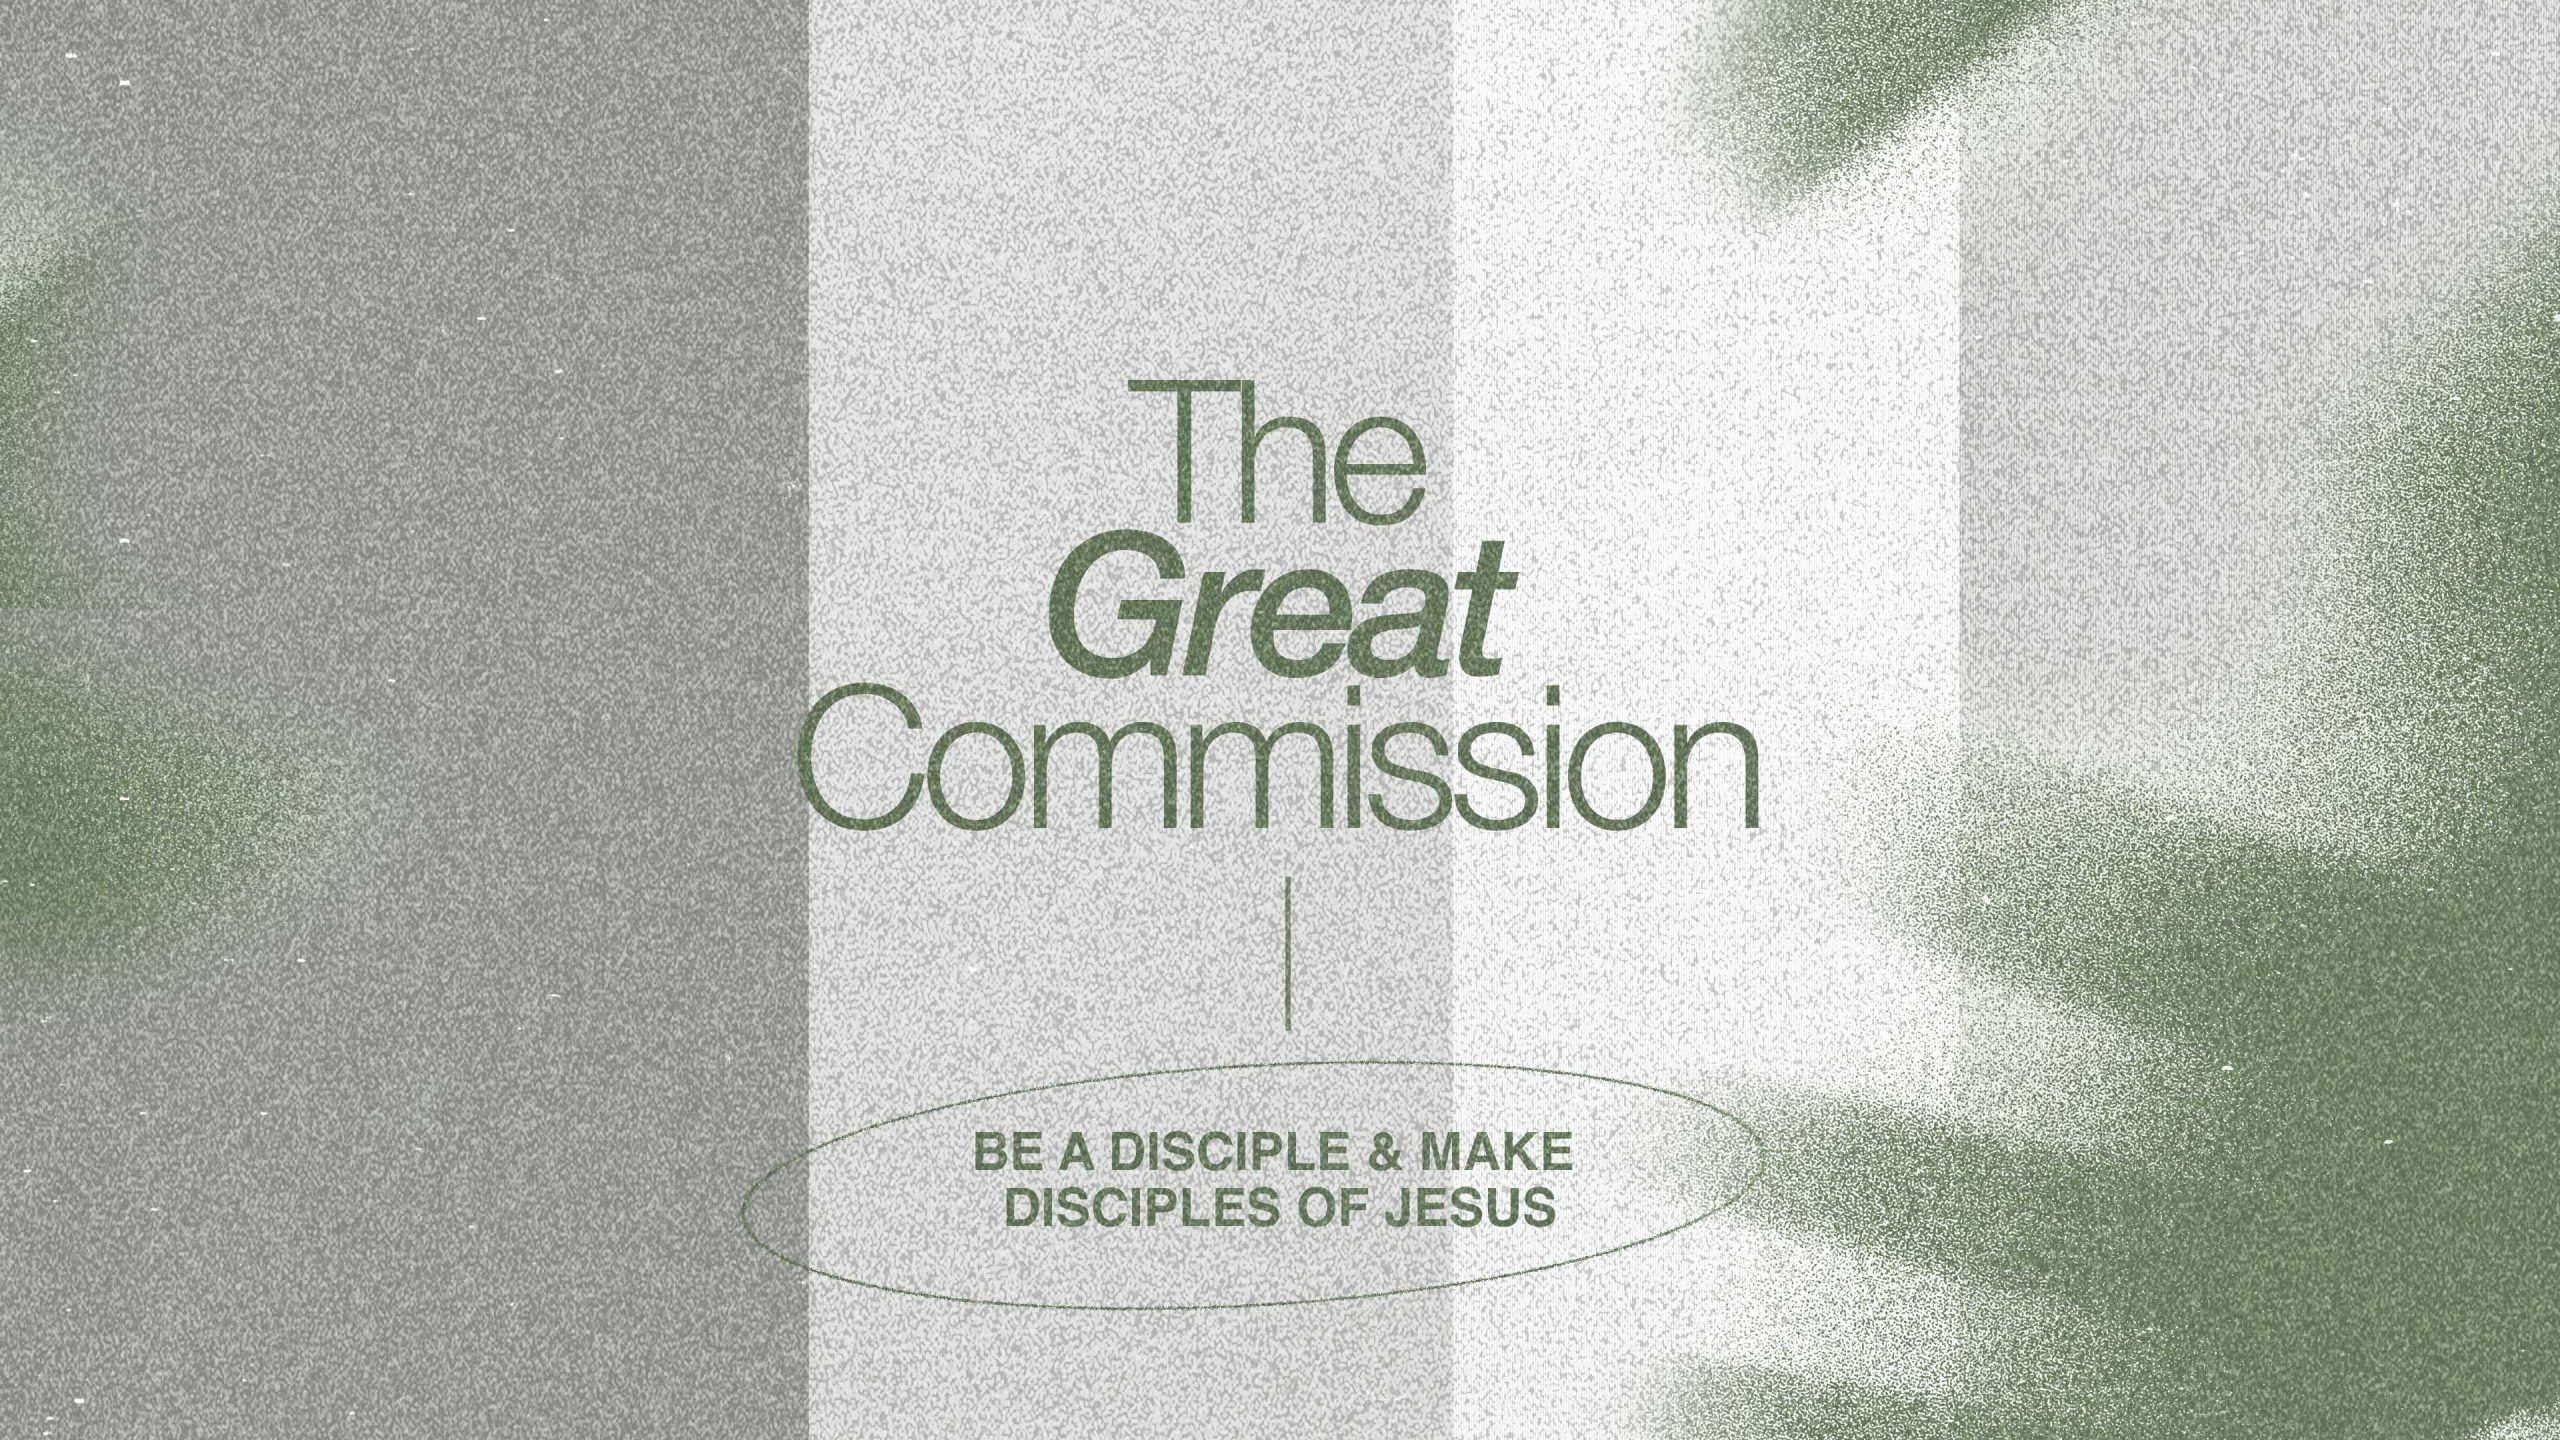 The Great Commission: Be a Disciple & Make Disciples of Jesus